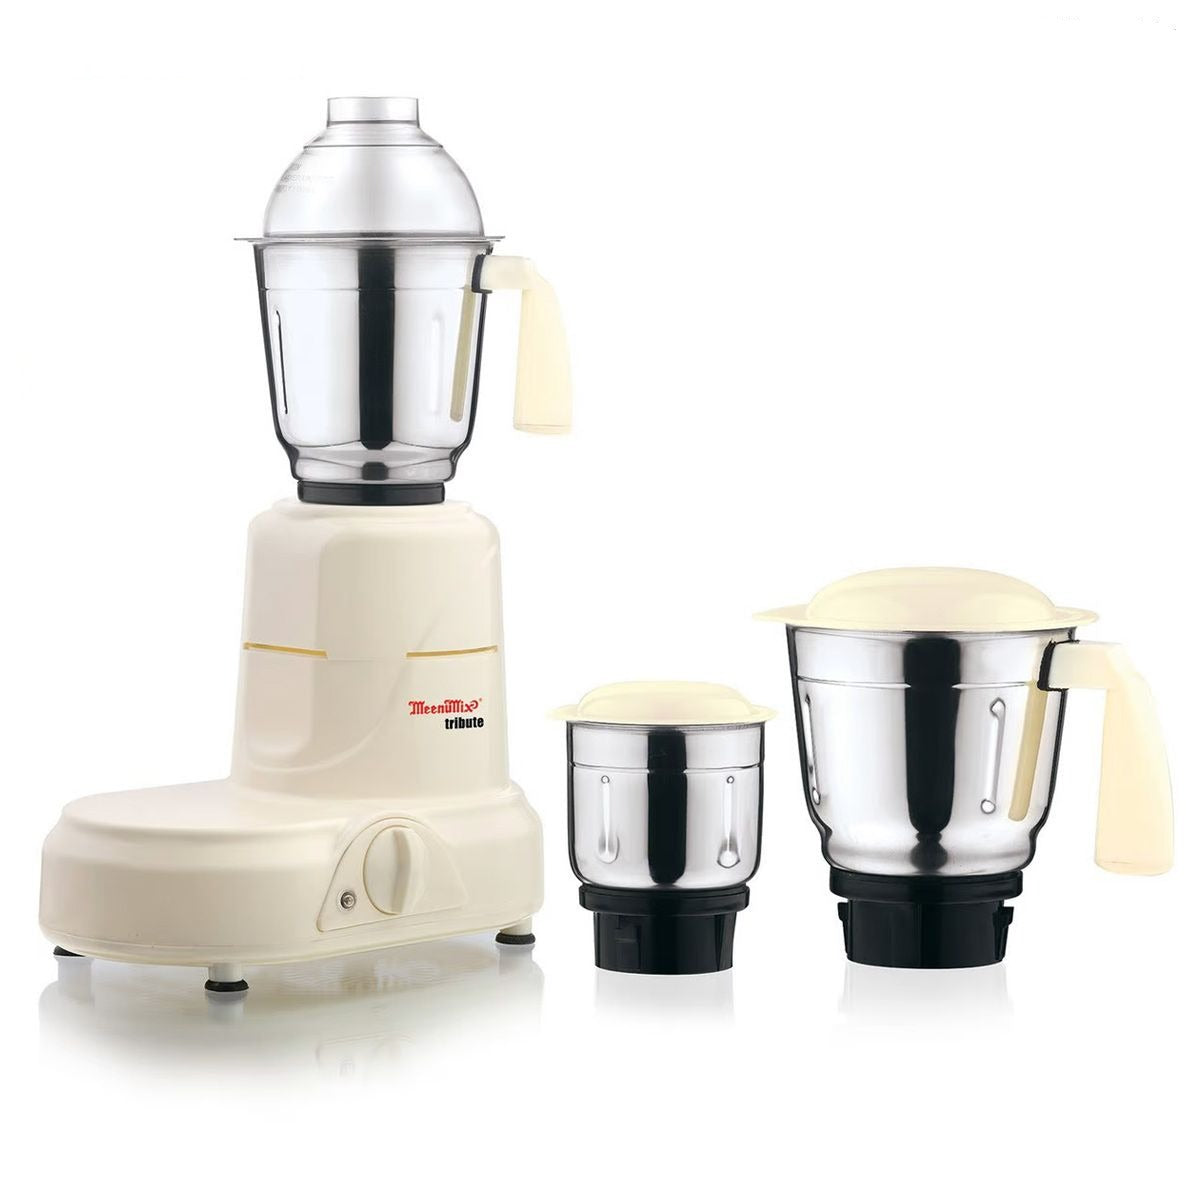 Blender with Stainless Steel 750W Motor Overload Protector | Kitchen Appliances | Halabh.com